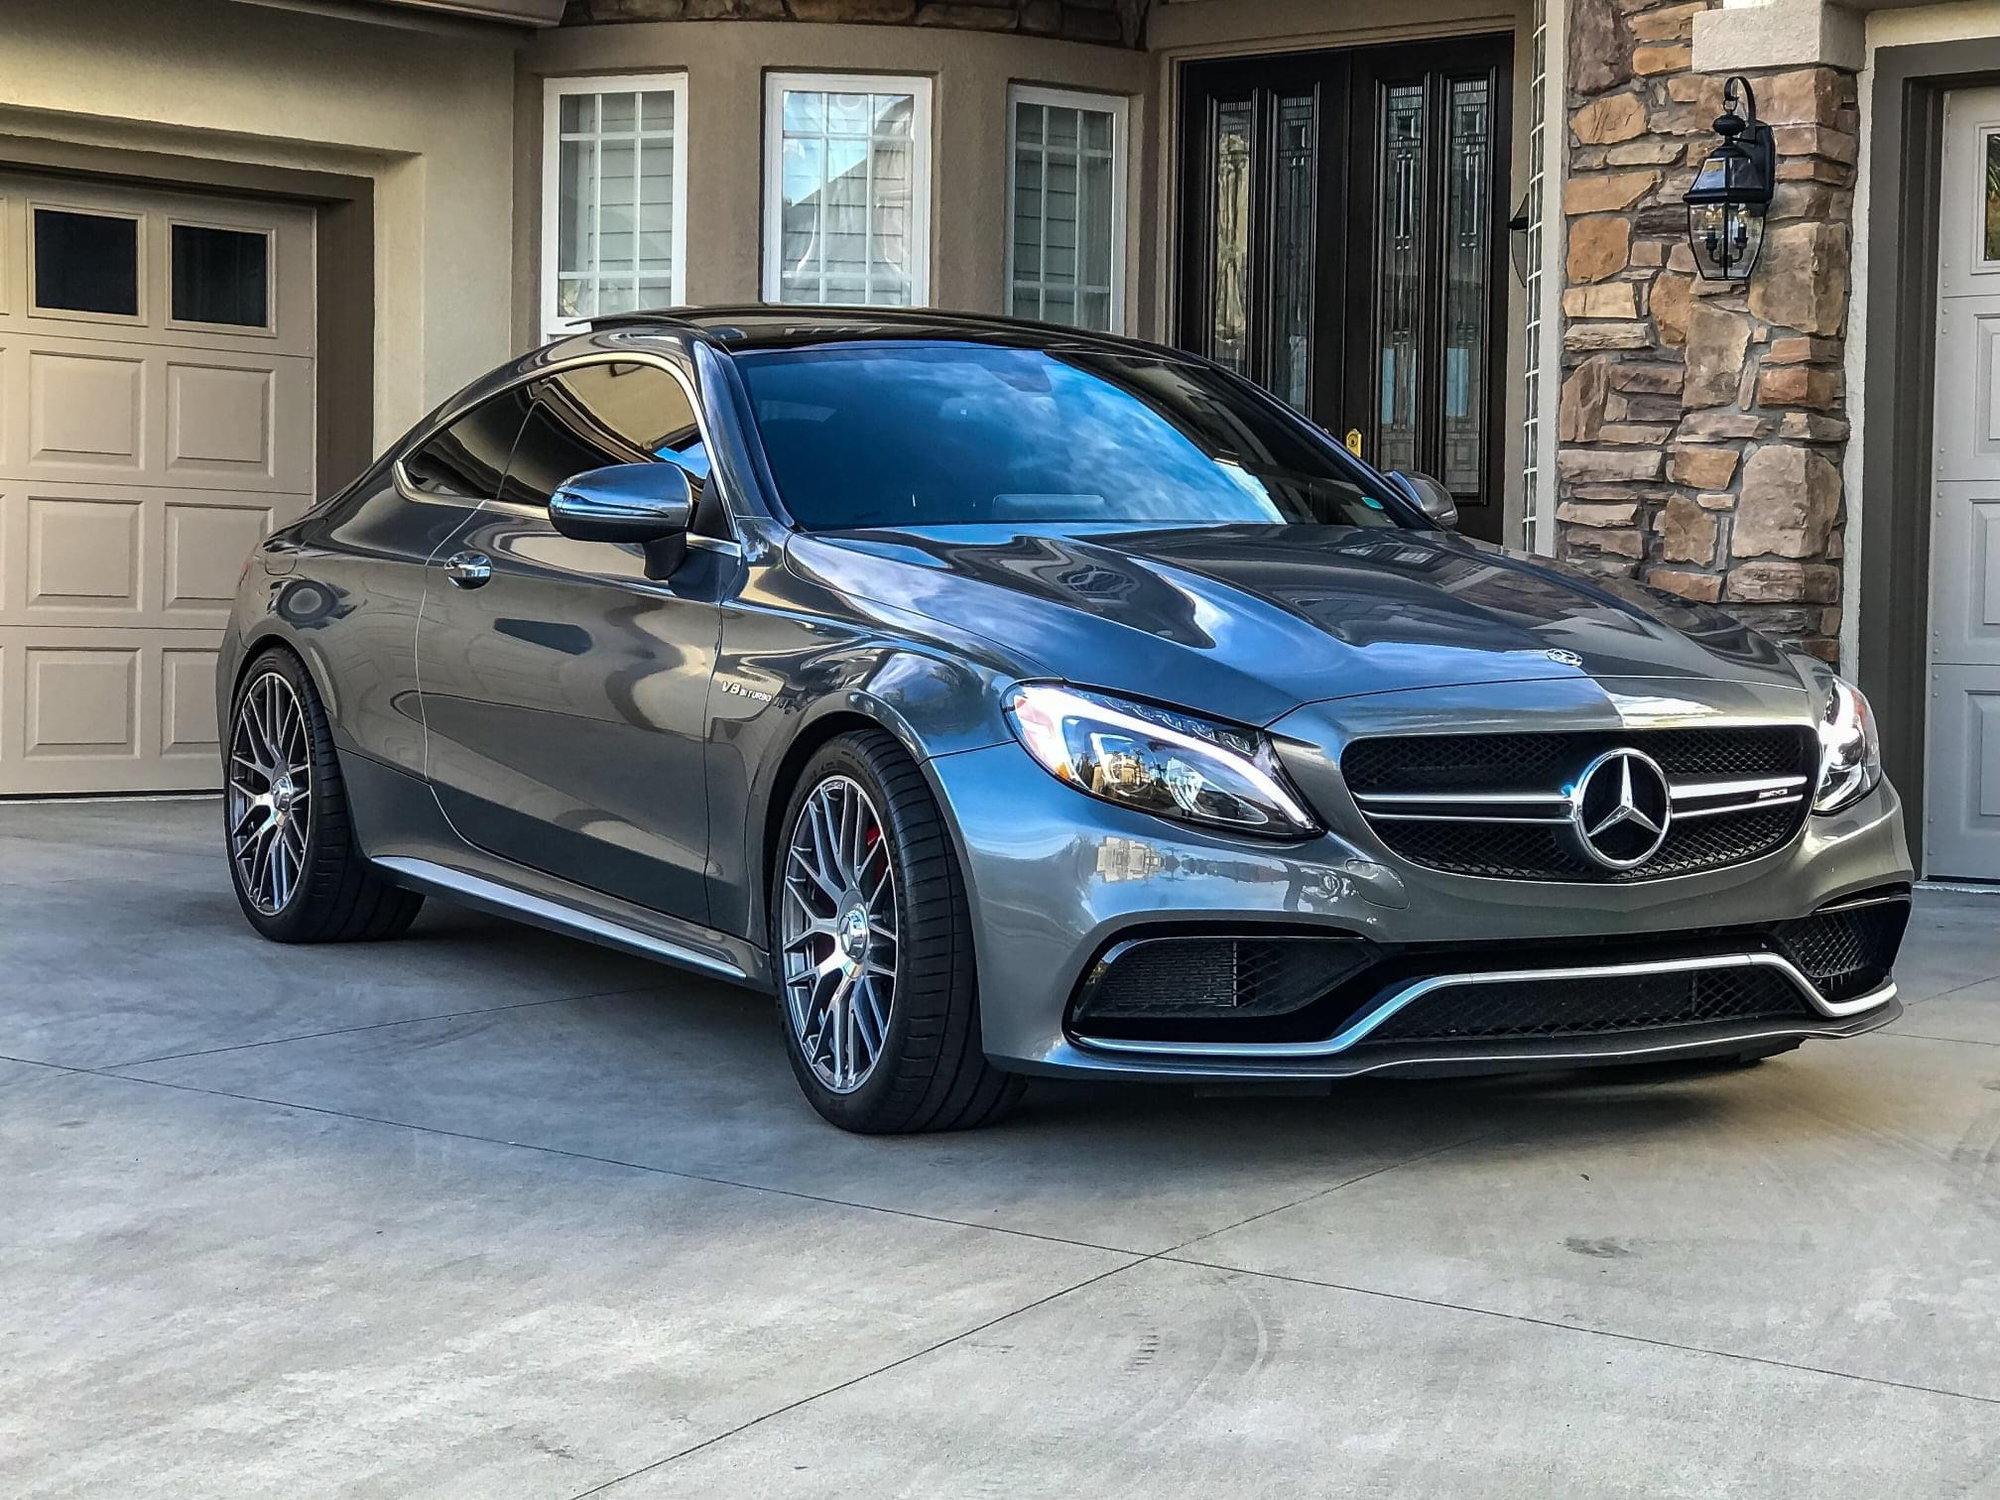 17 Amg C63s Coupe For Sale Mbworld Org Forums